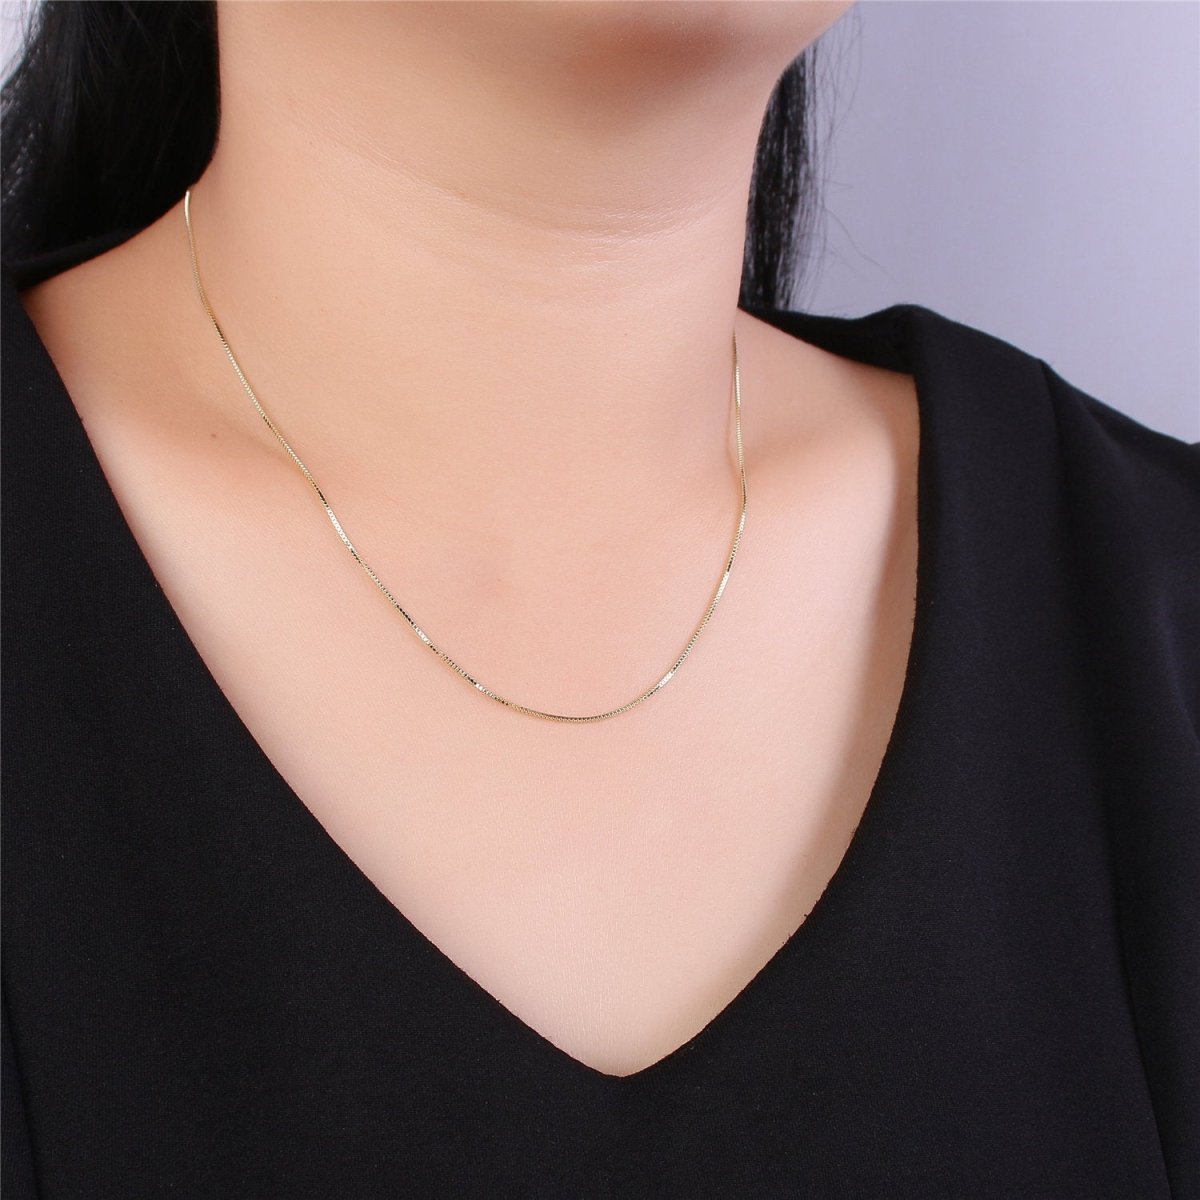 Dainty Gold Everyday Necklace / 14k Gold Plated Chain Necklace / 18 inch Dainty Box Chain Necklace / Minimal Jewelry / Everyday Necklace 1mm Width | CN-533 Clearance Pricing - DLUXCA